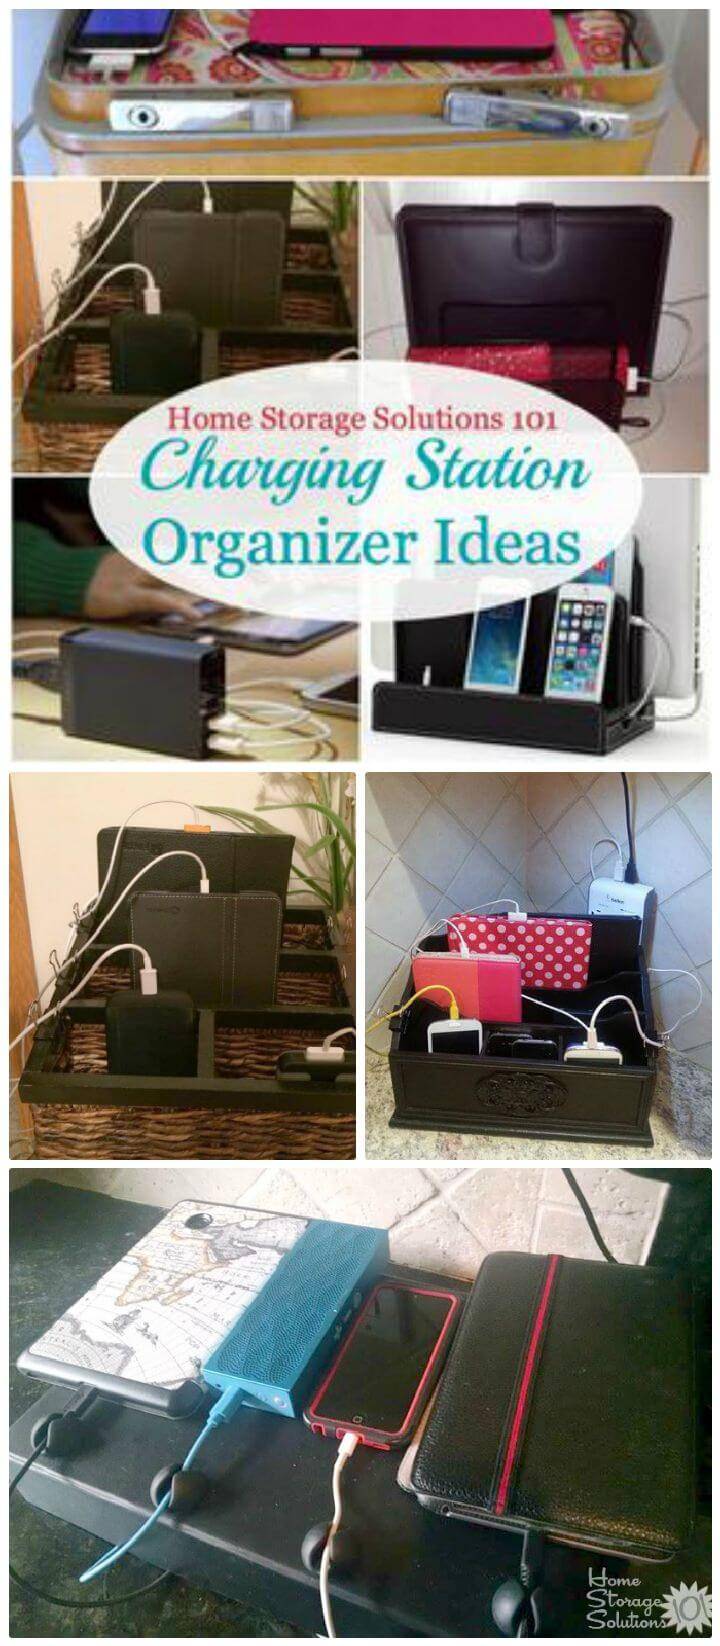 DIY Charging Station Organizer Ideas For Phones & Other Electronics